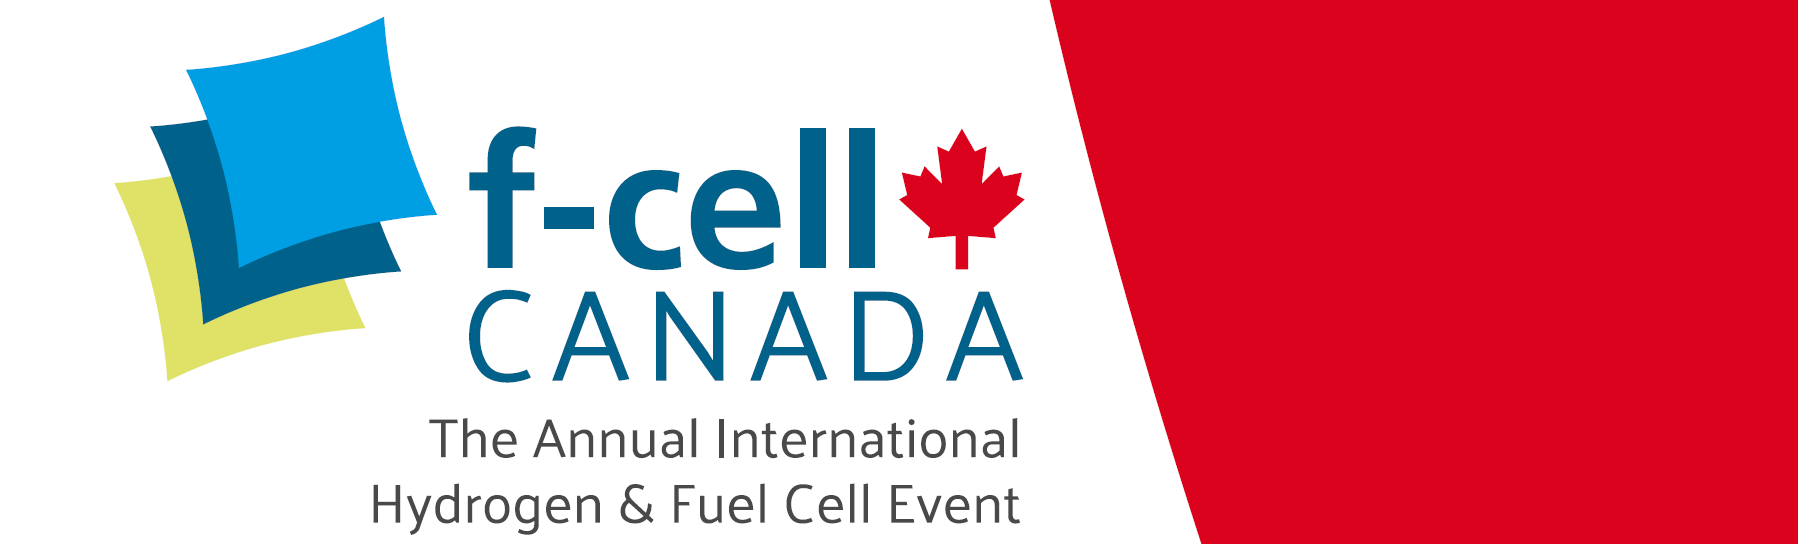 FTXT was Invited to Attend the 4th Annual International Hydrogen & Fuel Cell Even